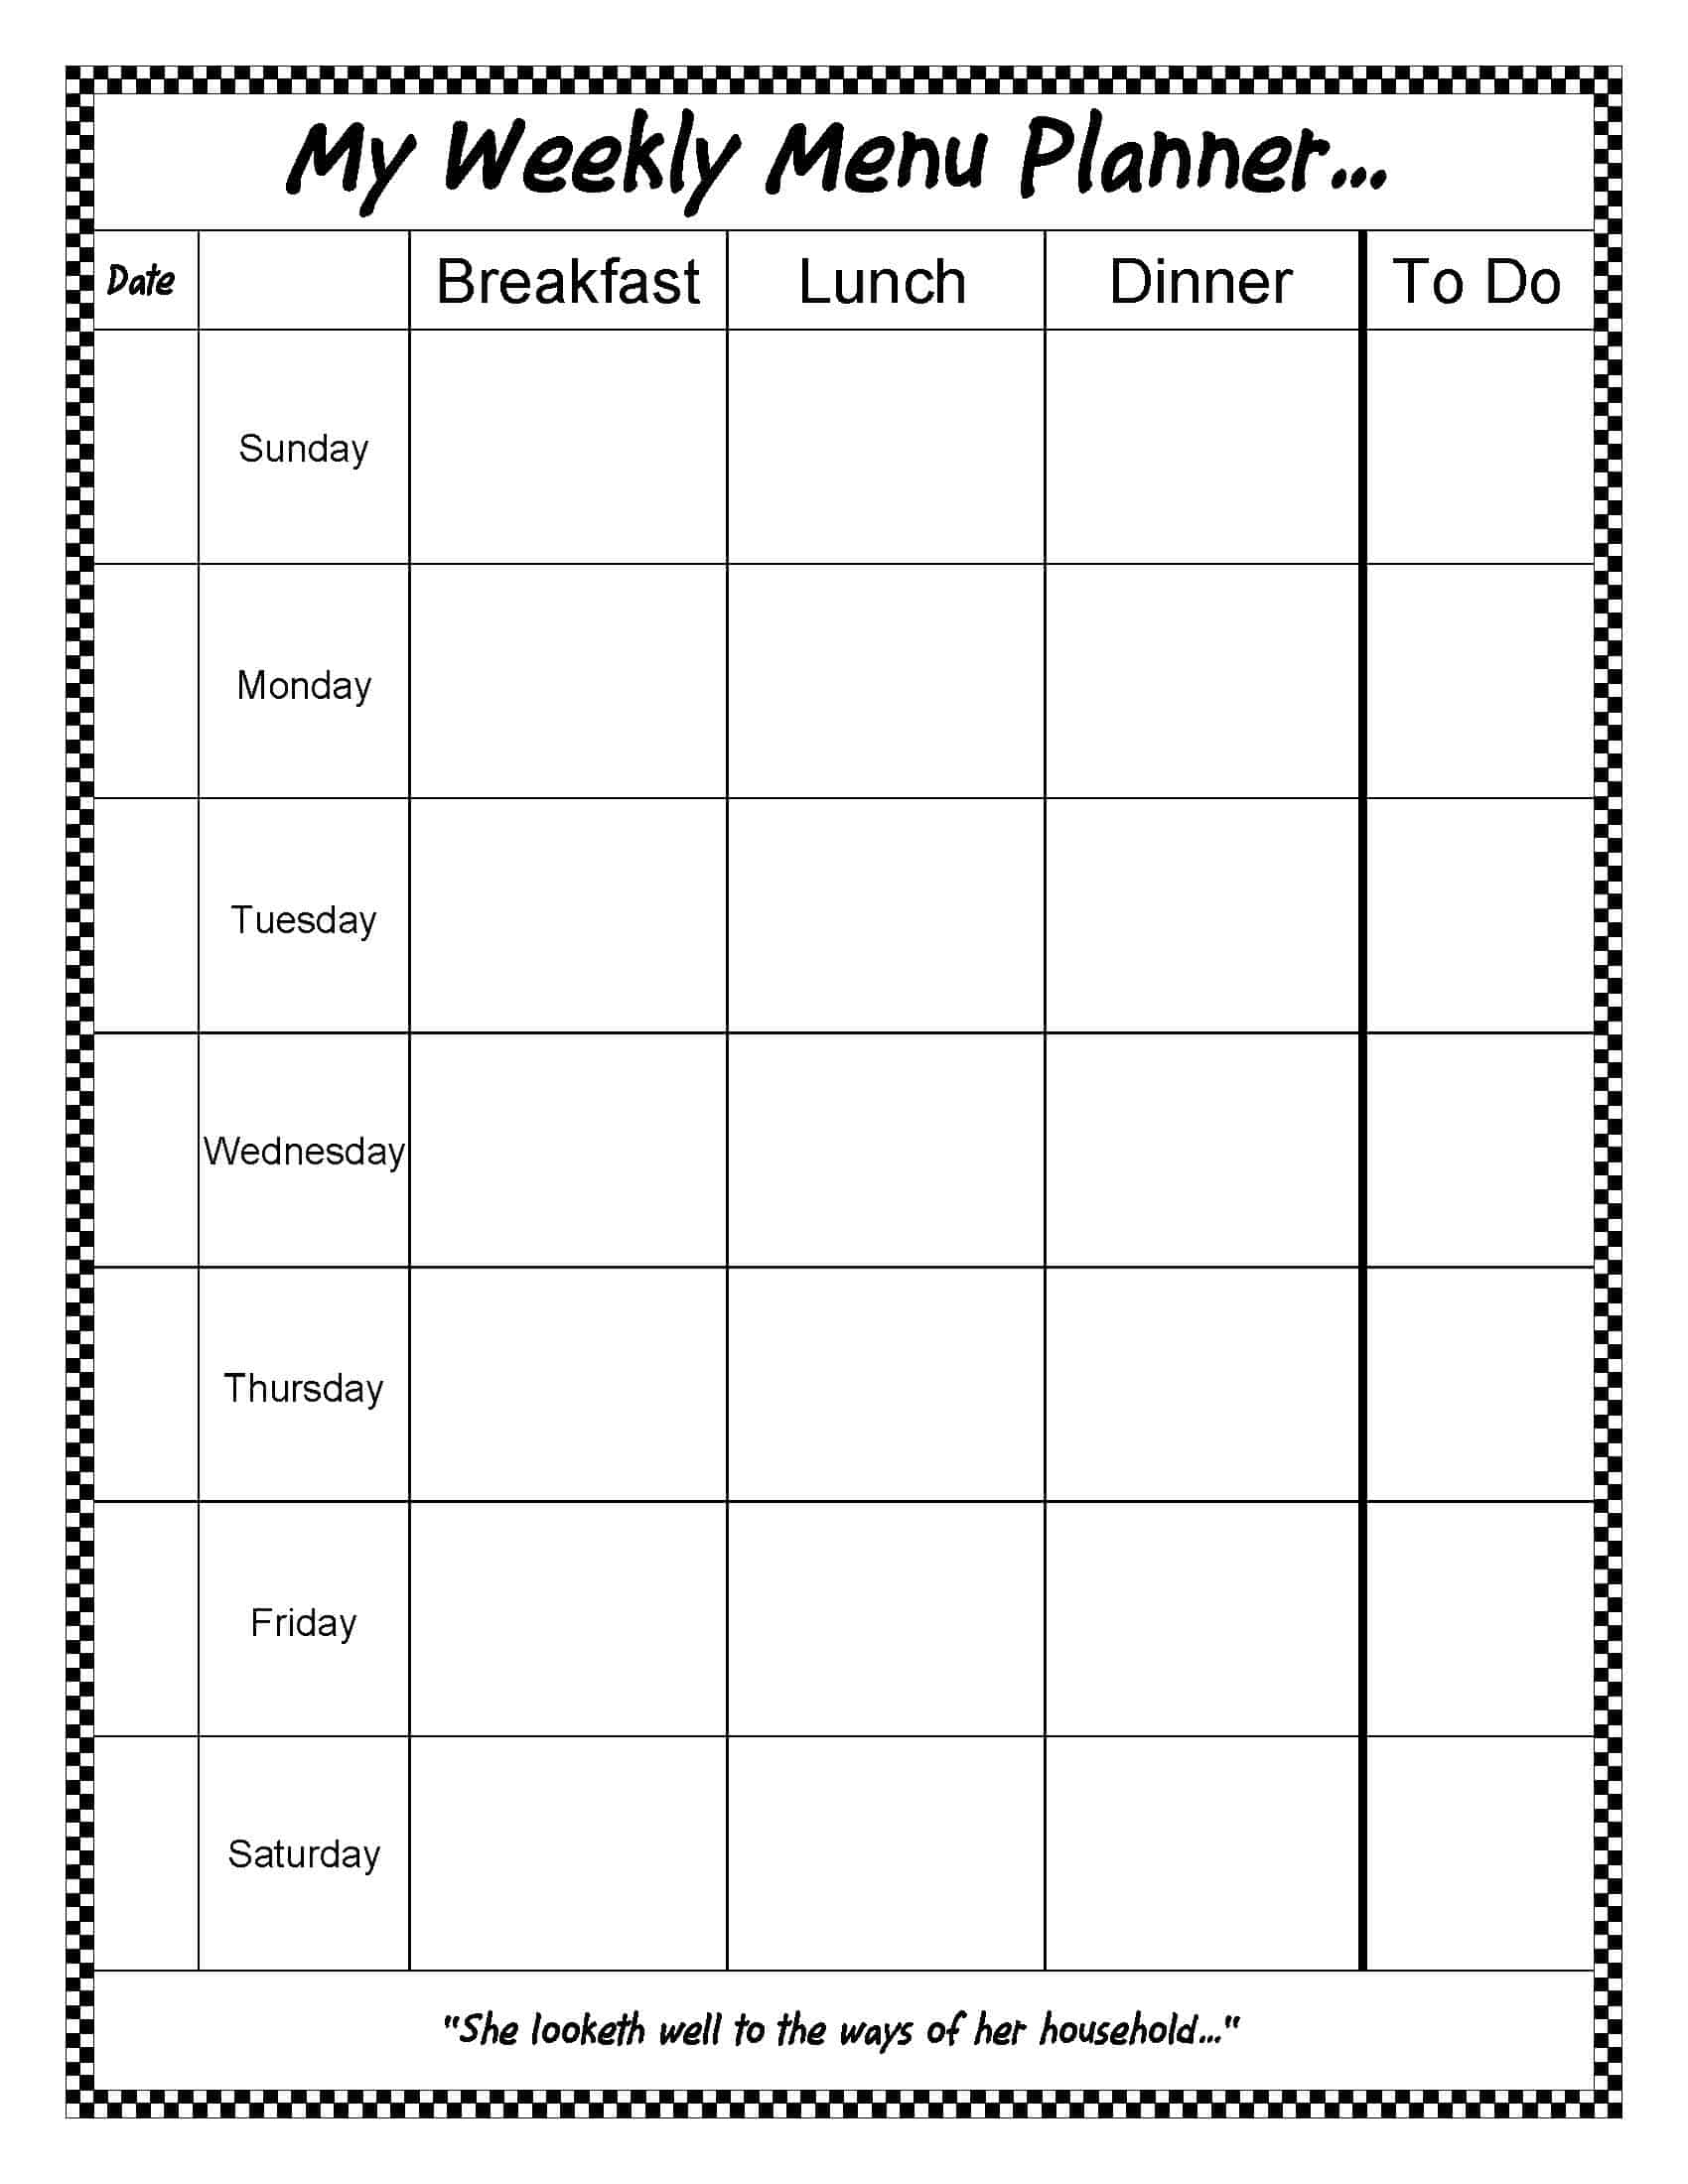 My Weekly Menu Planner With New Borders free Download 